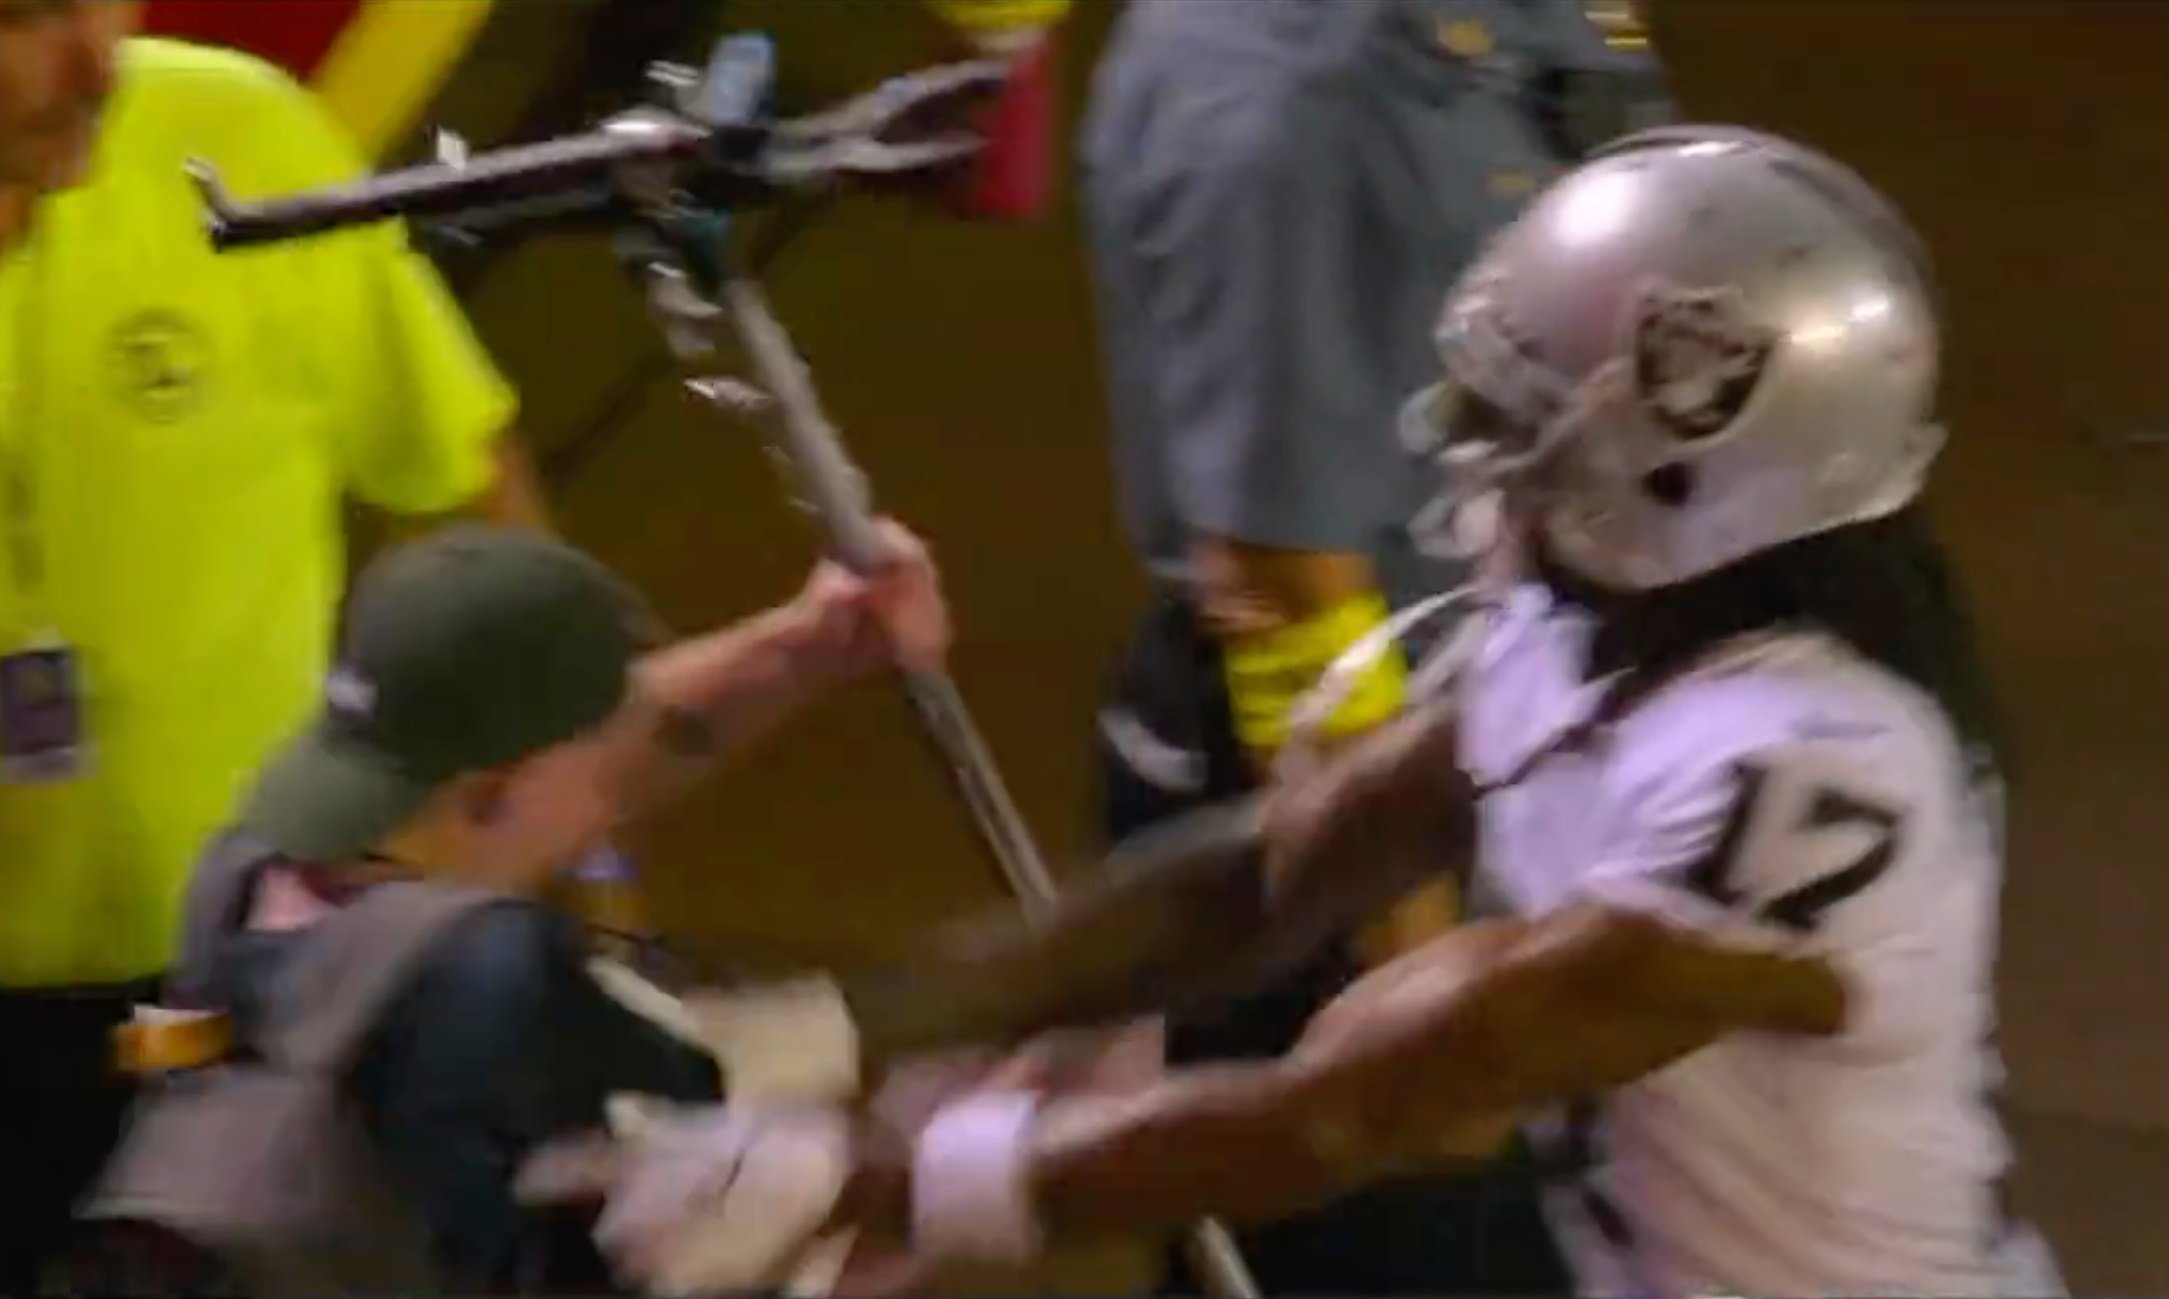 Raiders WR Davante Adams facing charge after shoving photographer